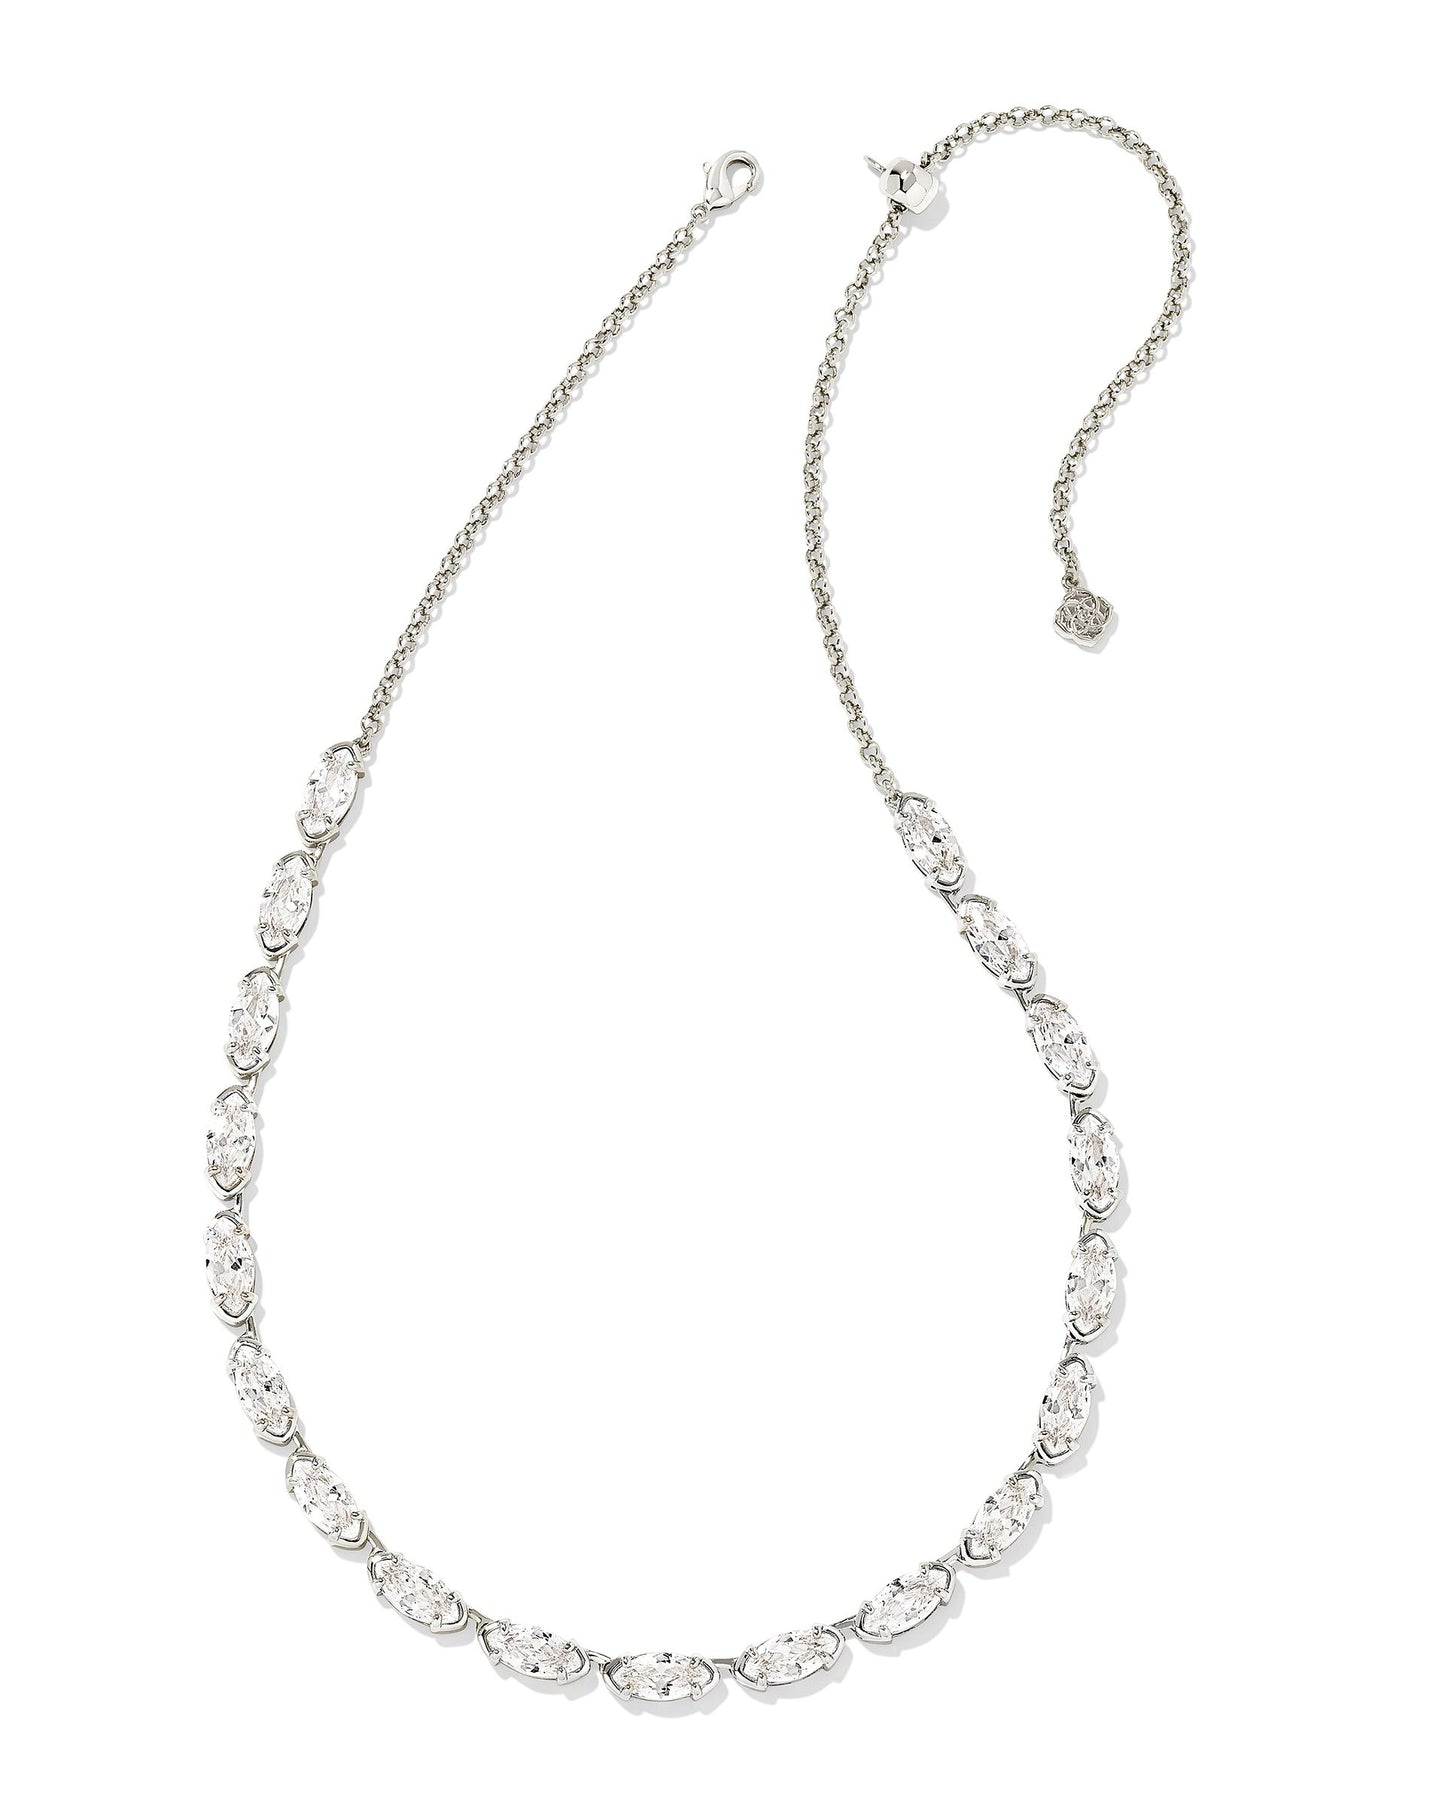 Hello, sparkly stunner! Featuring a bold chain studded with crystals, the Genevieve Strand Necklace in White Crystal adds that “wow” factor to your outfit, making it perfect for every standout occasion.  Dimensions-16' CHAIN WITH 3' EXTENDER,0.15'W Metal- 14K Gold plated over brass(Gold), Rhodium Over Brass (Silver) Closure- Lobster clasp w/ single adjustable slider bead Material- White CZ This one is silver